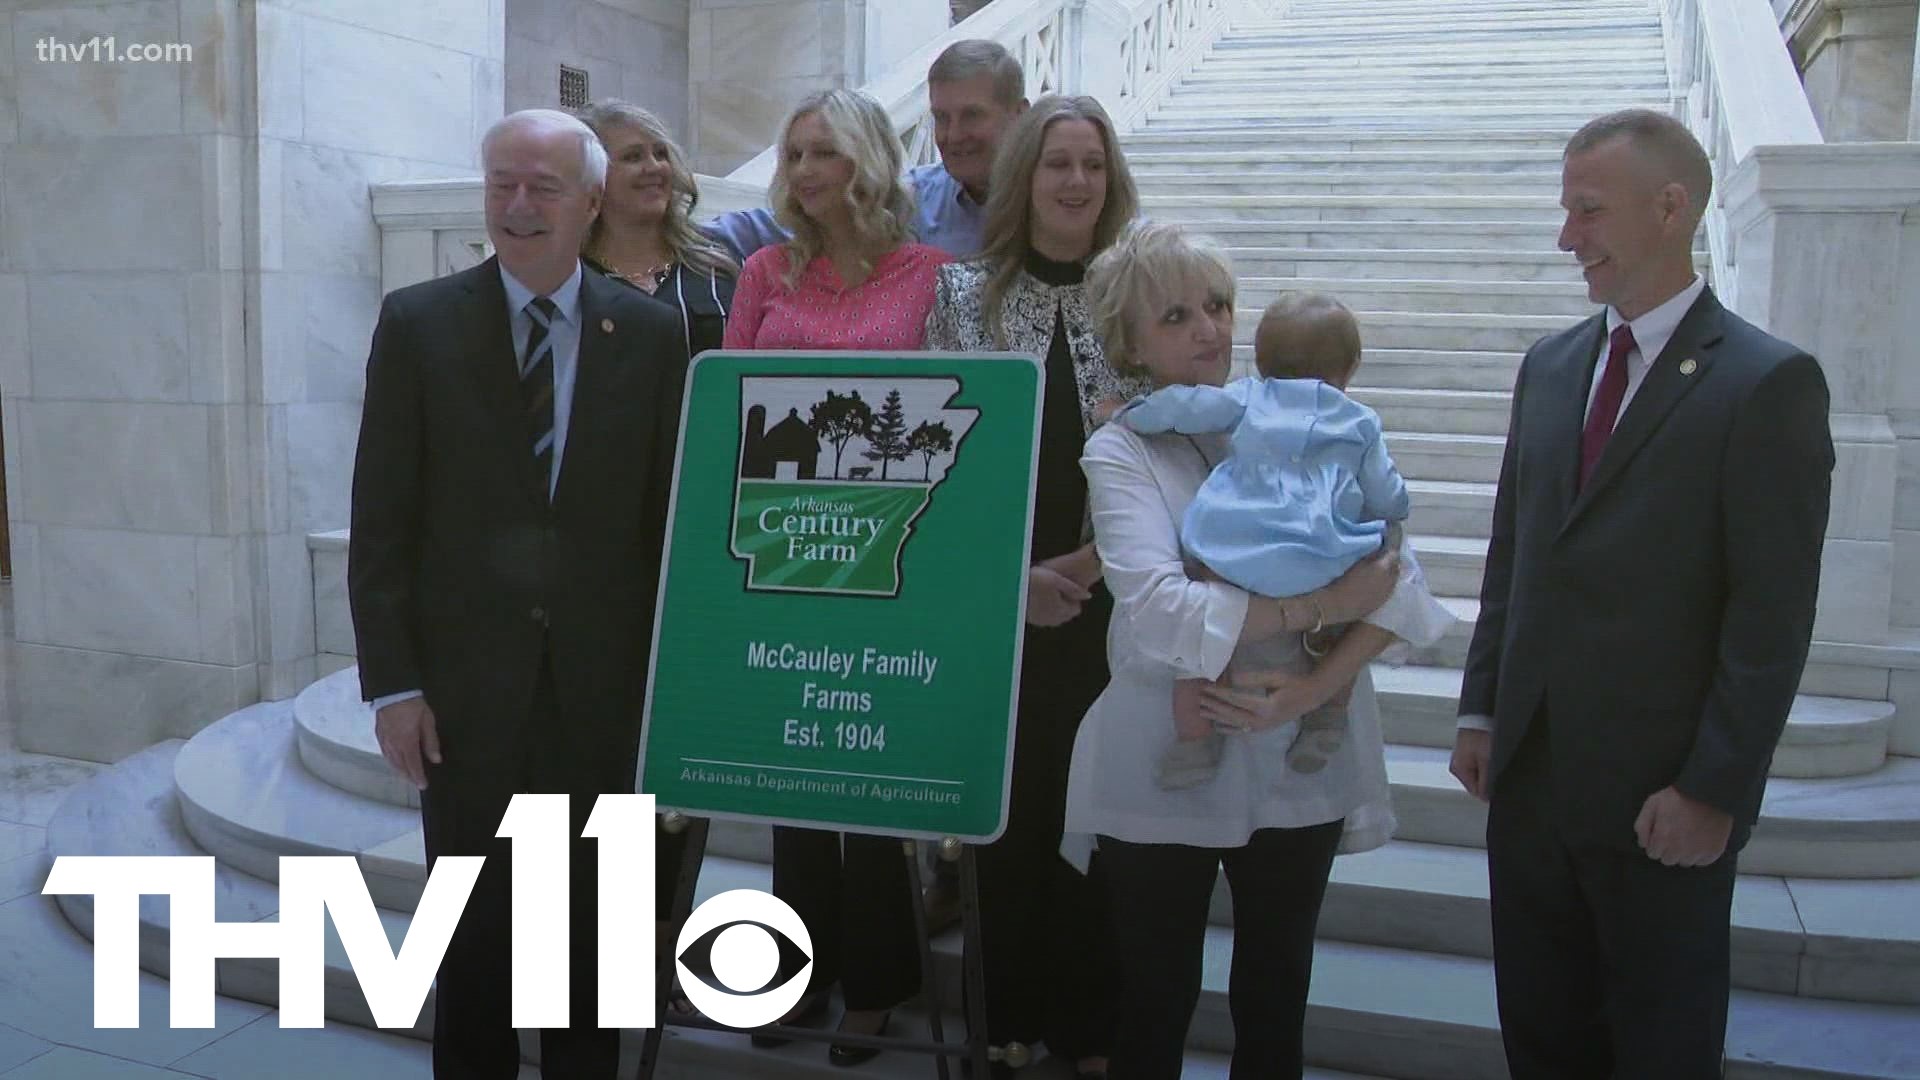 Many family farms in Arkansas got recognition as the newest members of the century club at the Arkansas State Capitol on Monday.